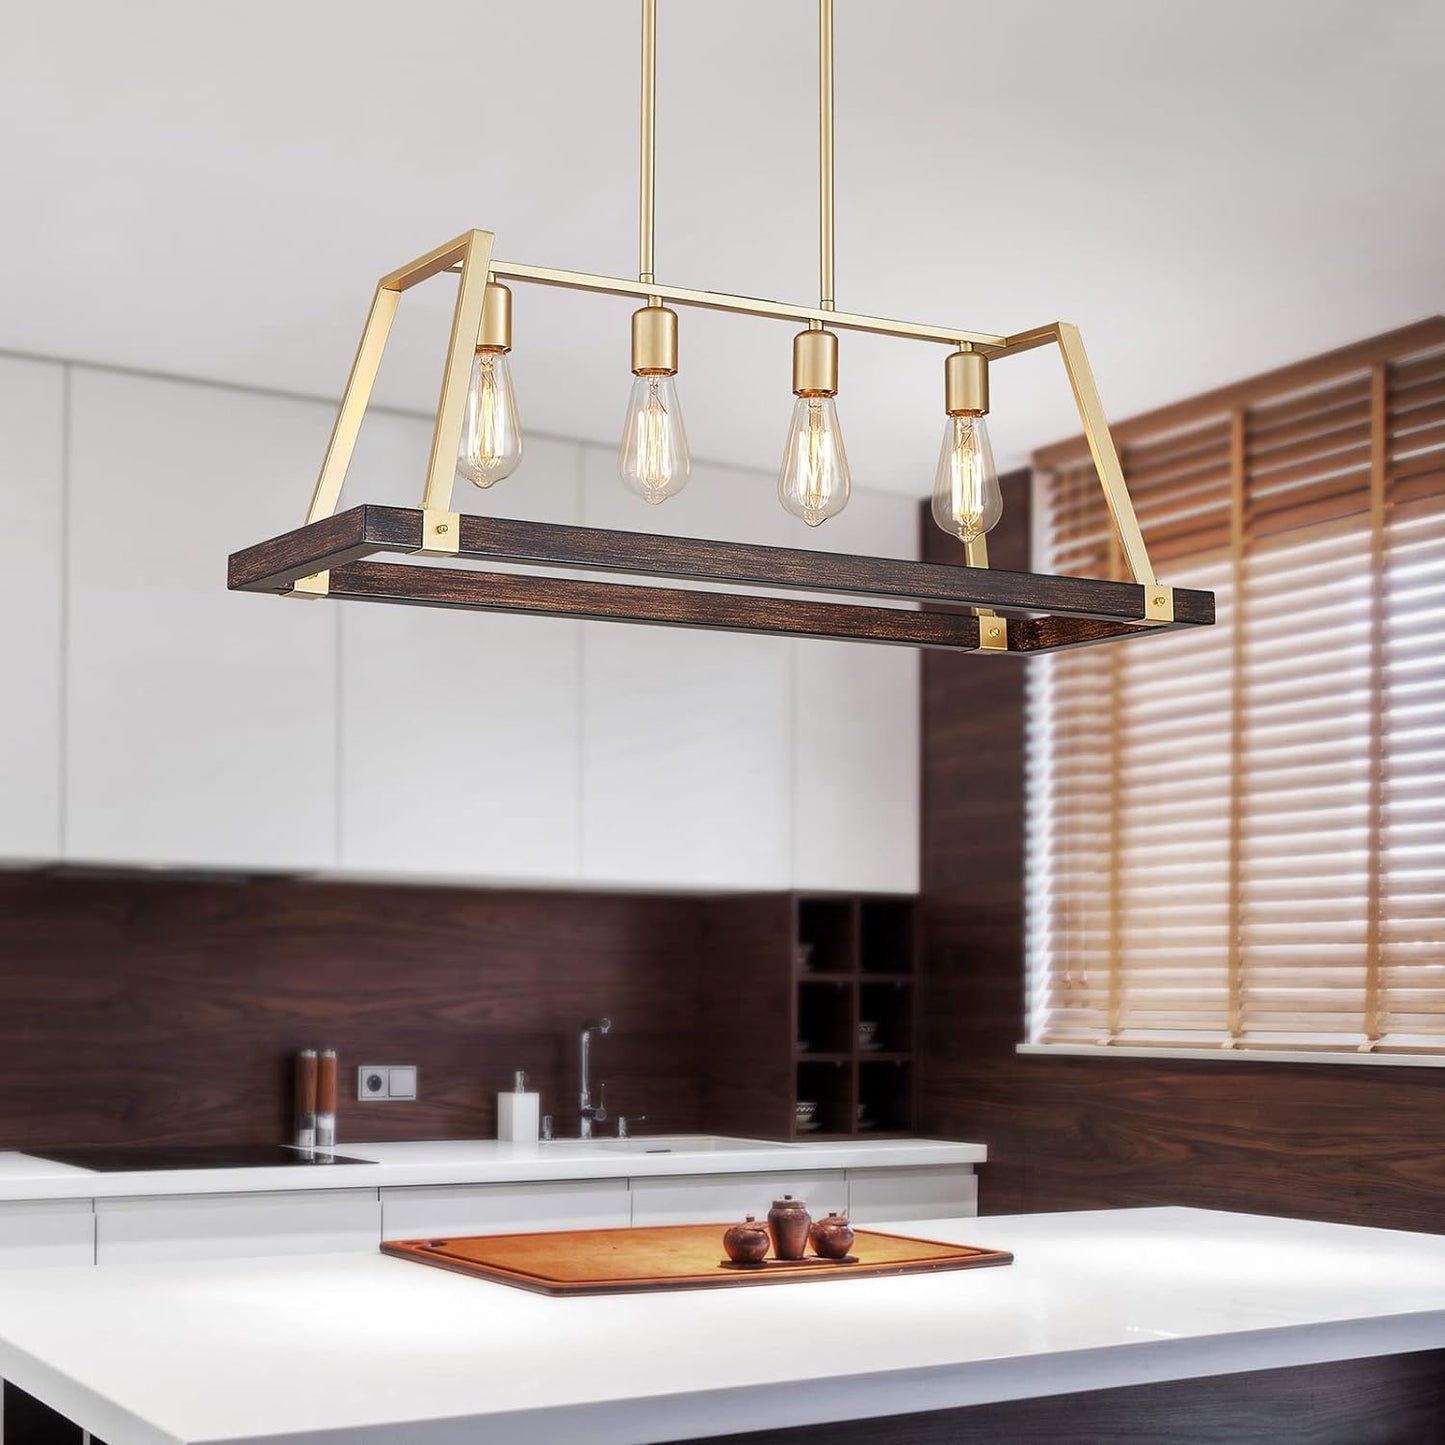 ANJIADENGSHI Painted Wood Color Golden Metal Finish Farmhouse Kitchen Island Pendant Lighting LED Fixture Dining Room Livingroom (Bulbs Not Included) (CL-LF097-Golden)